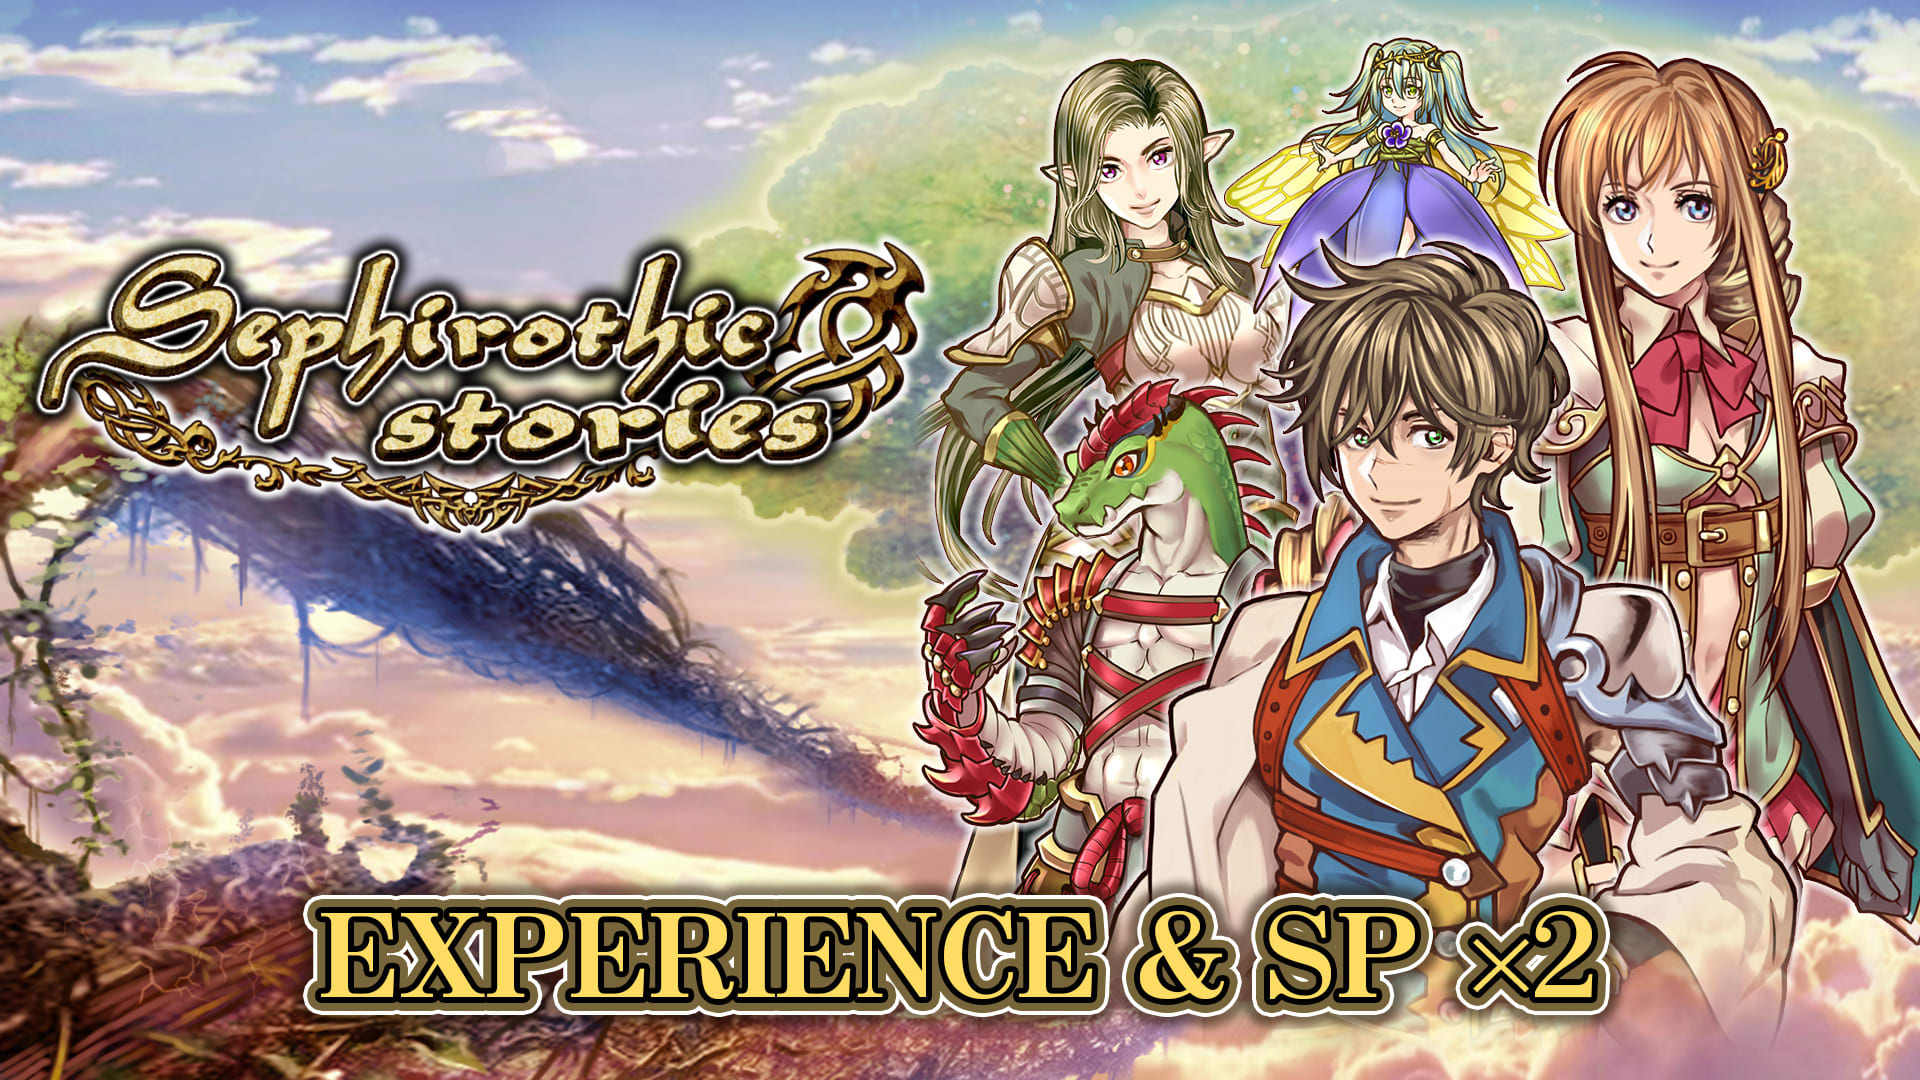 Experience & SP x2 - Sephirothic Stories